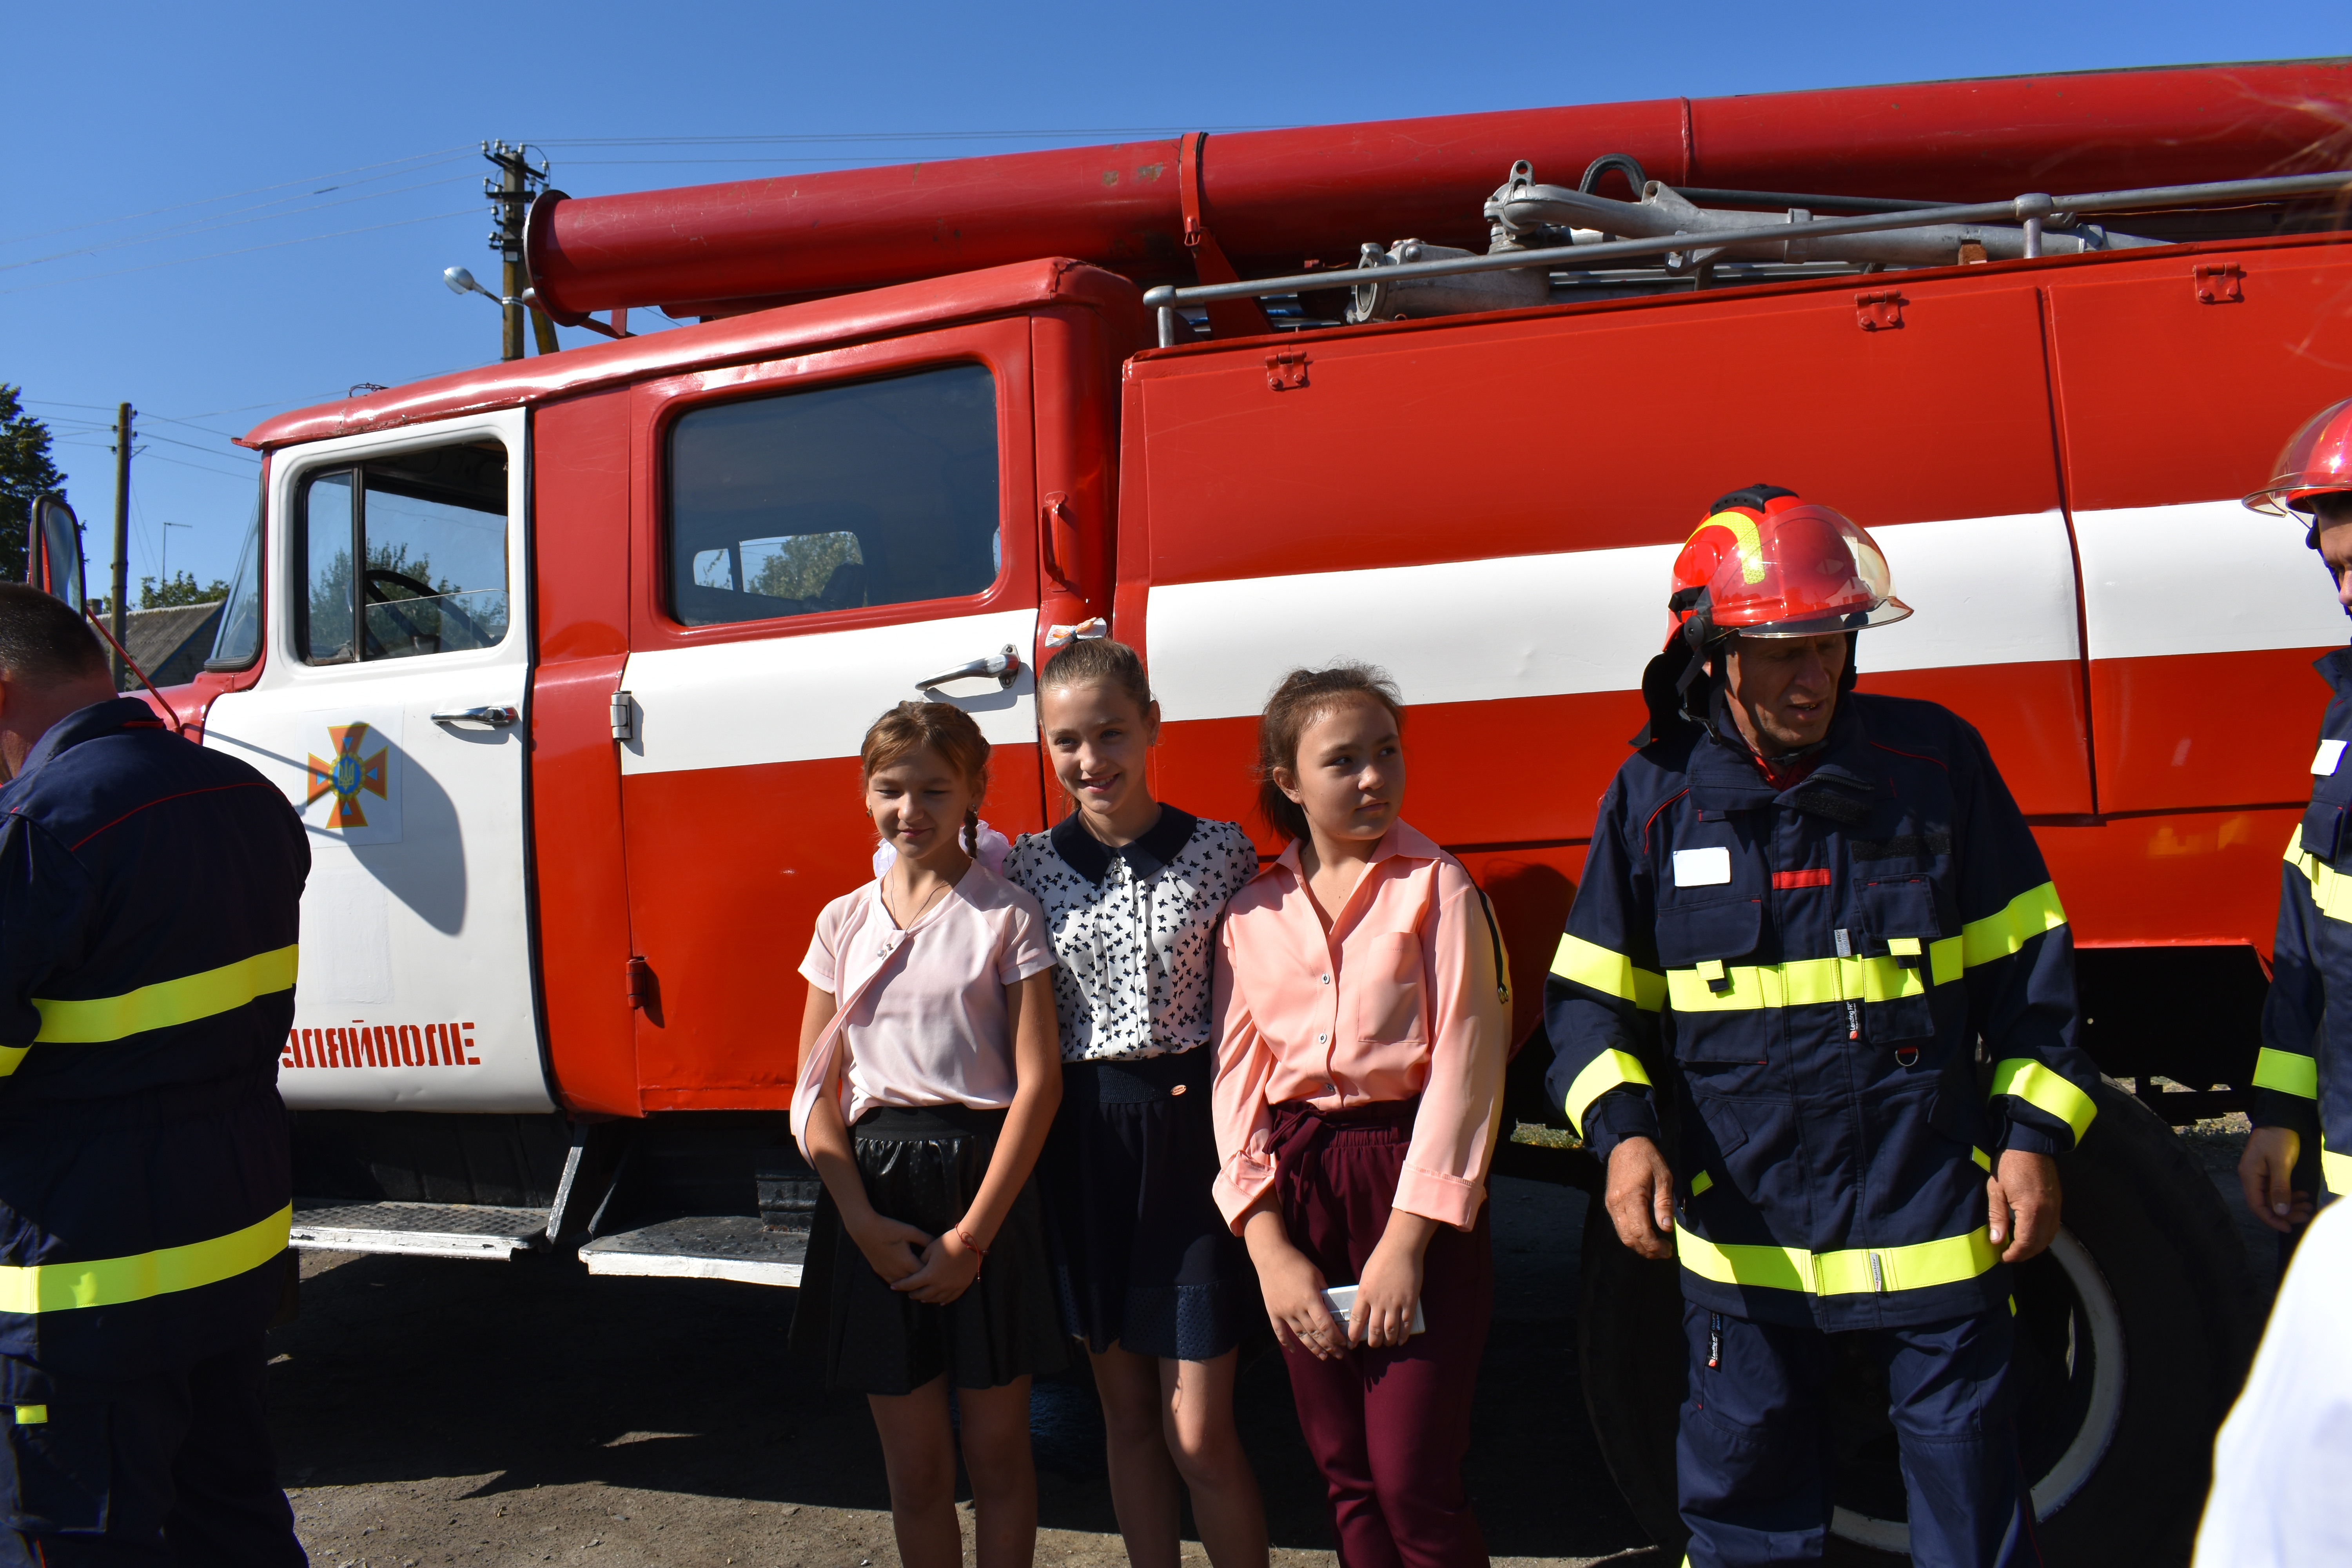 Voluntary fire protection unit set up in Guliaypilska AH 